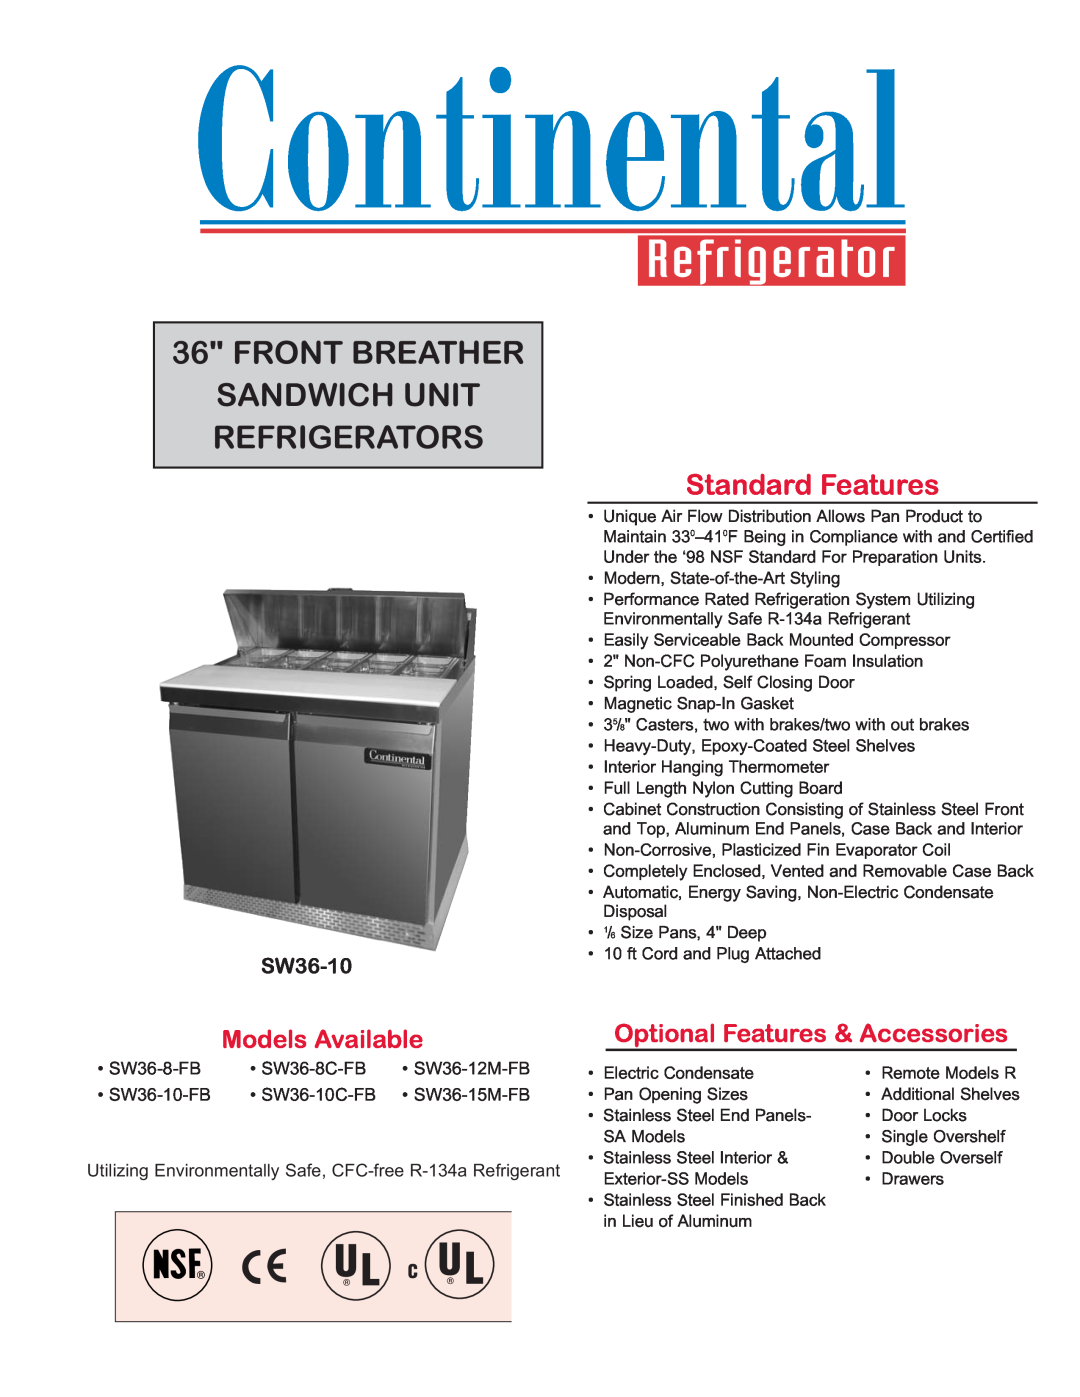 Continental Refrigerator SW36-12M-FB manual Front Breather Sandwich Unit Refrigerators, Standard Features, SW36-10 